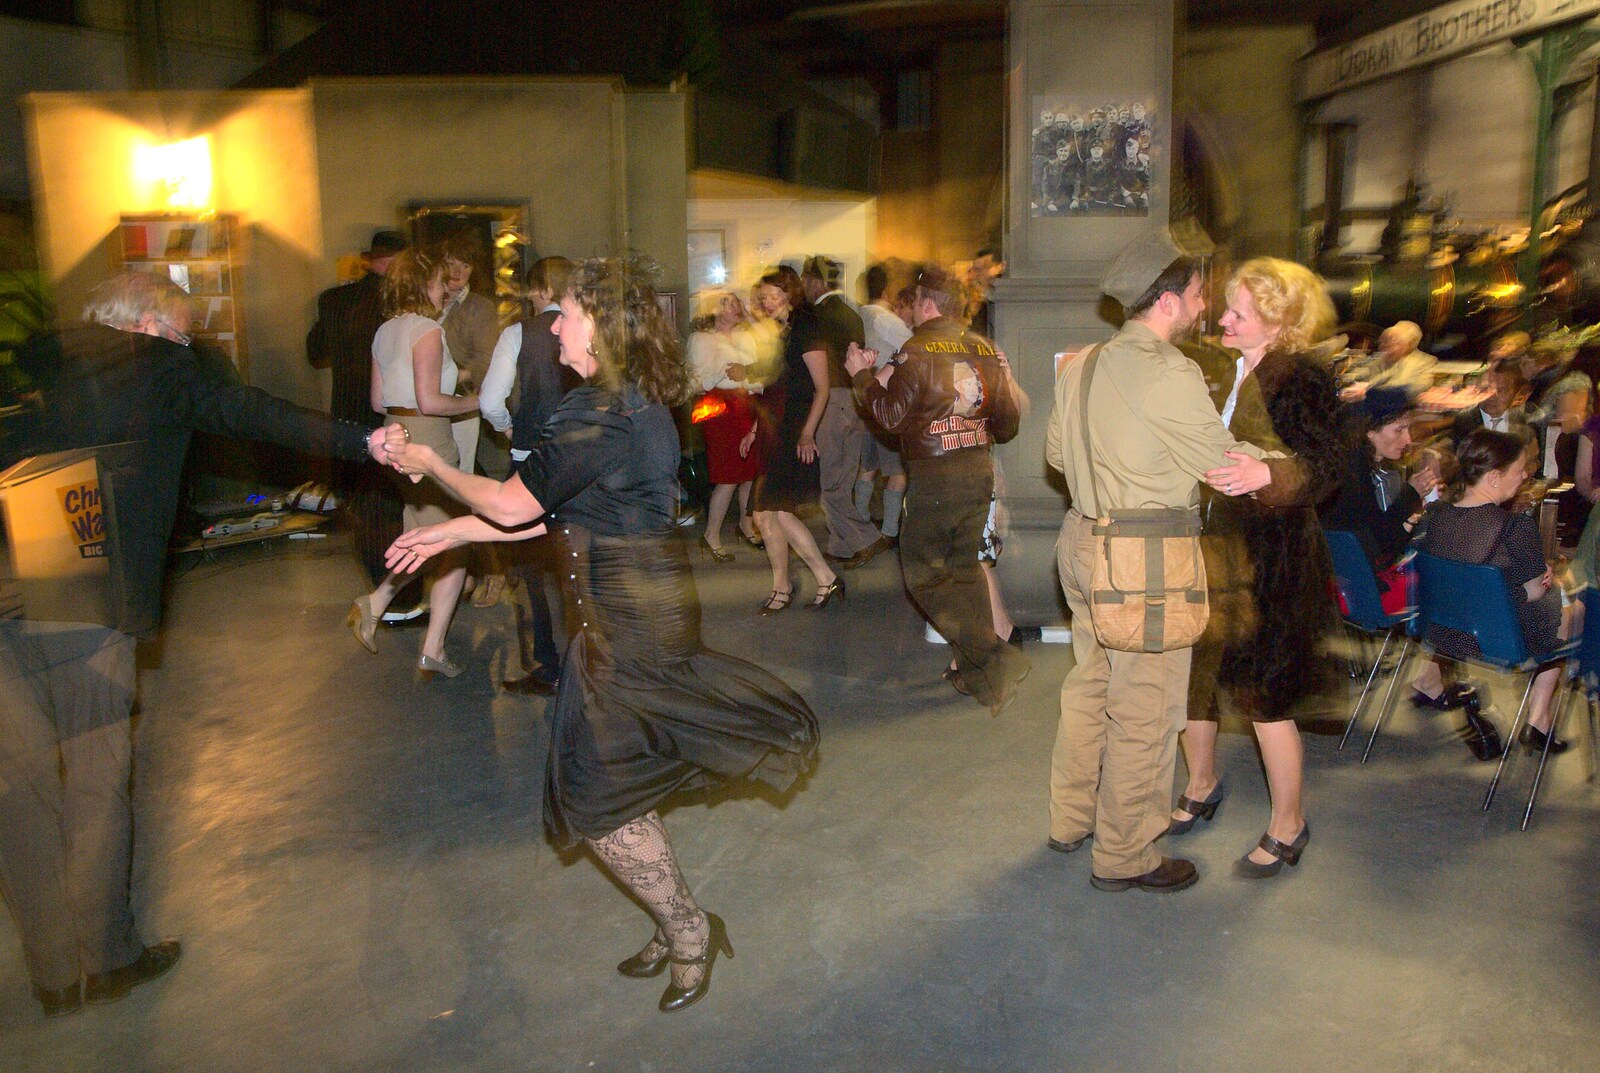 The Bressingham Blitz 1940s Dance, Bressingham Steam Museum, Norfolk - 21st May 2010: More dancing to the Chris Walls band